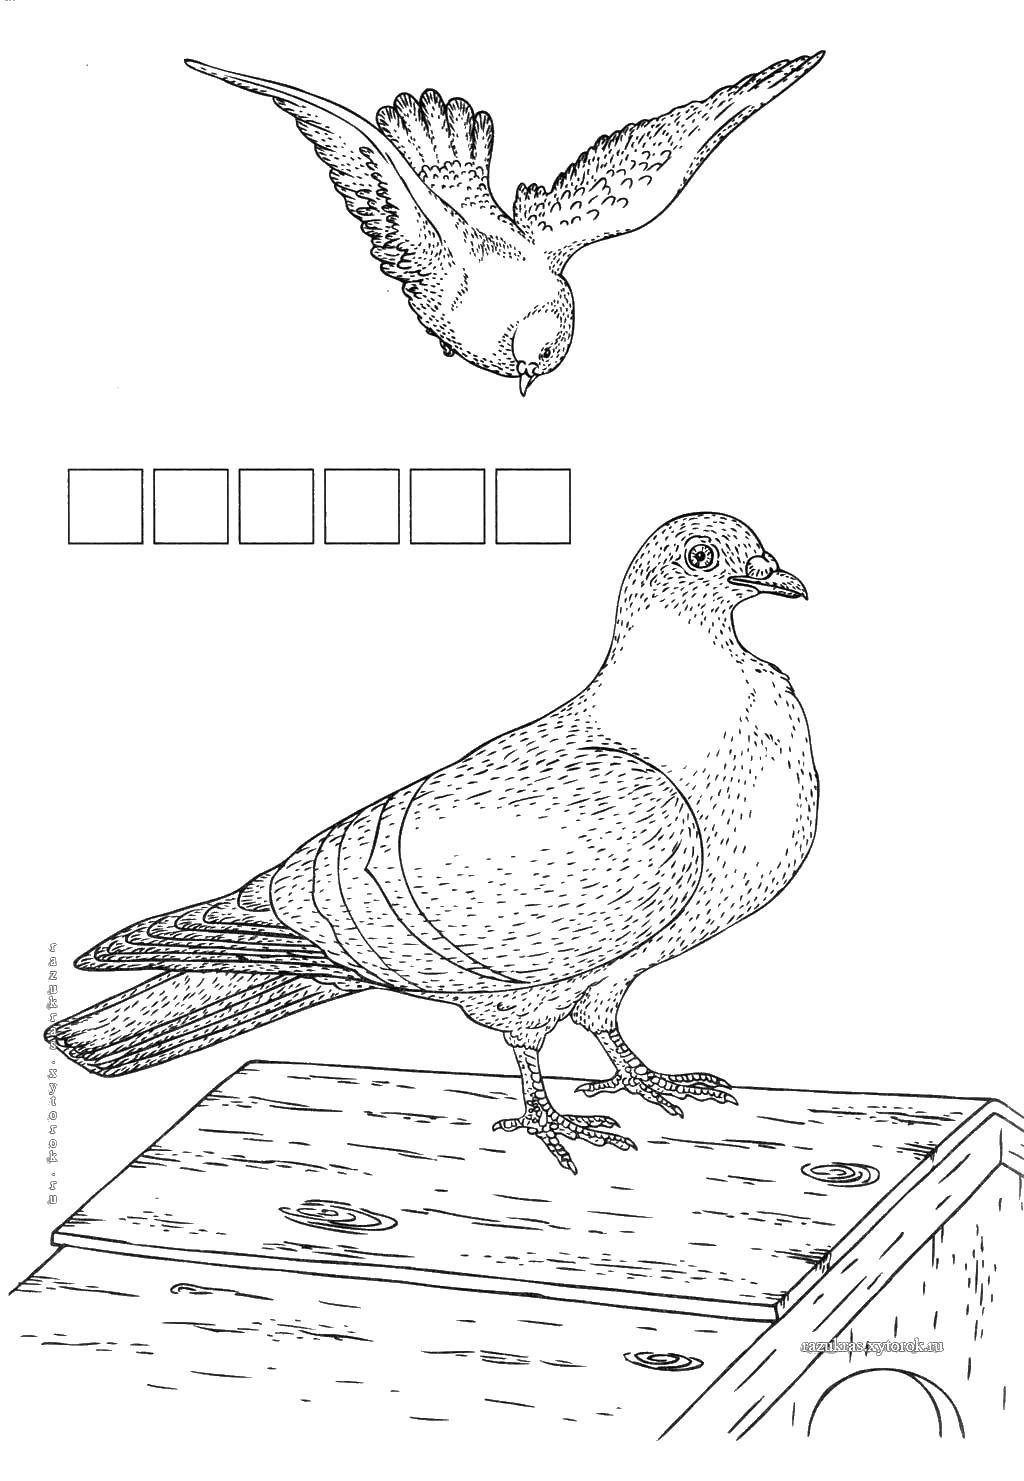 Coloring Pigeons.. Category birds. Tags:  Birds, dove.